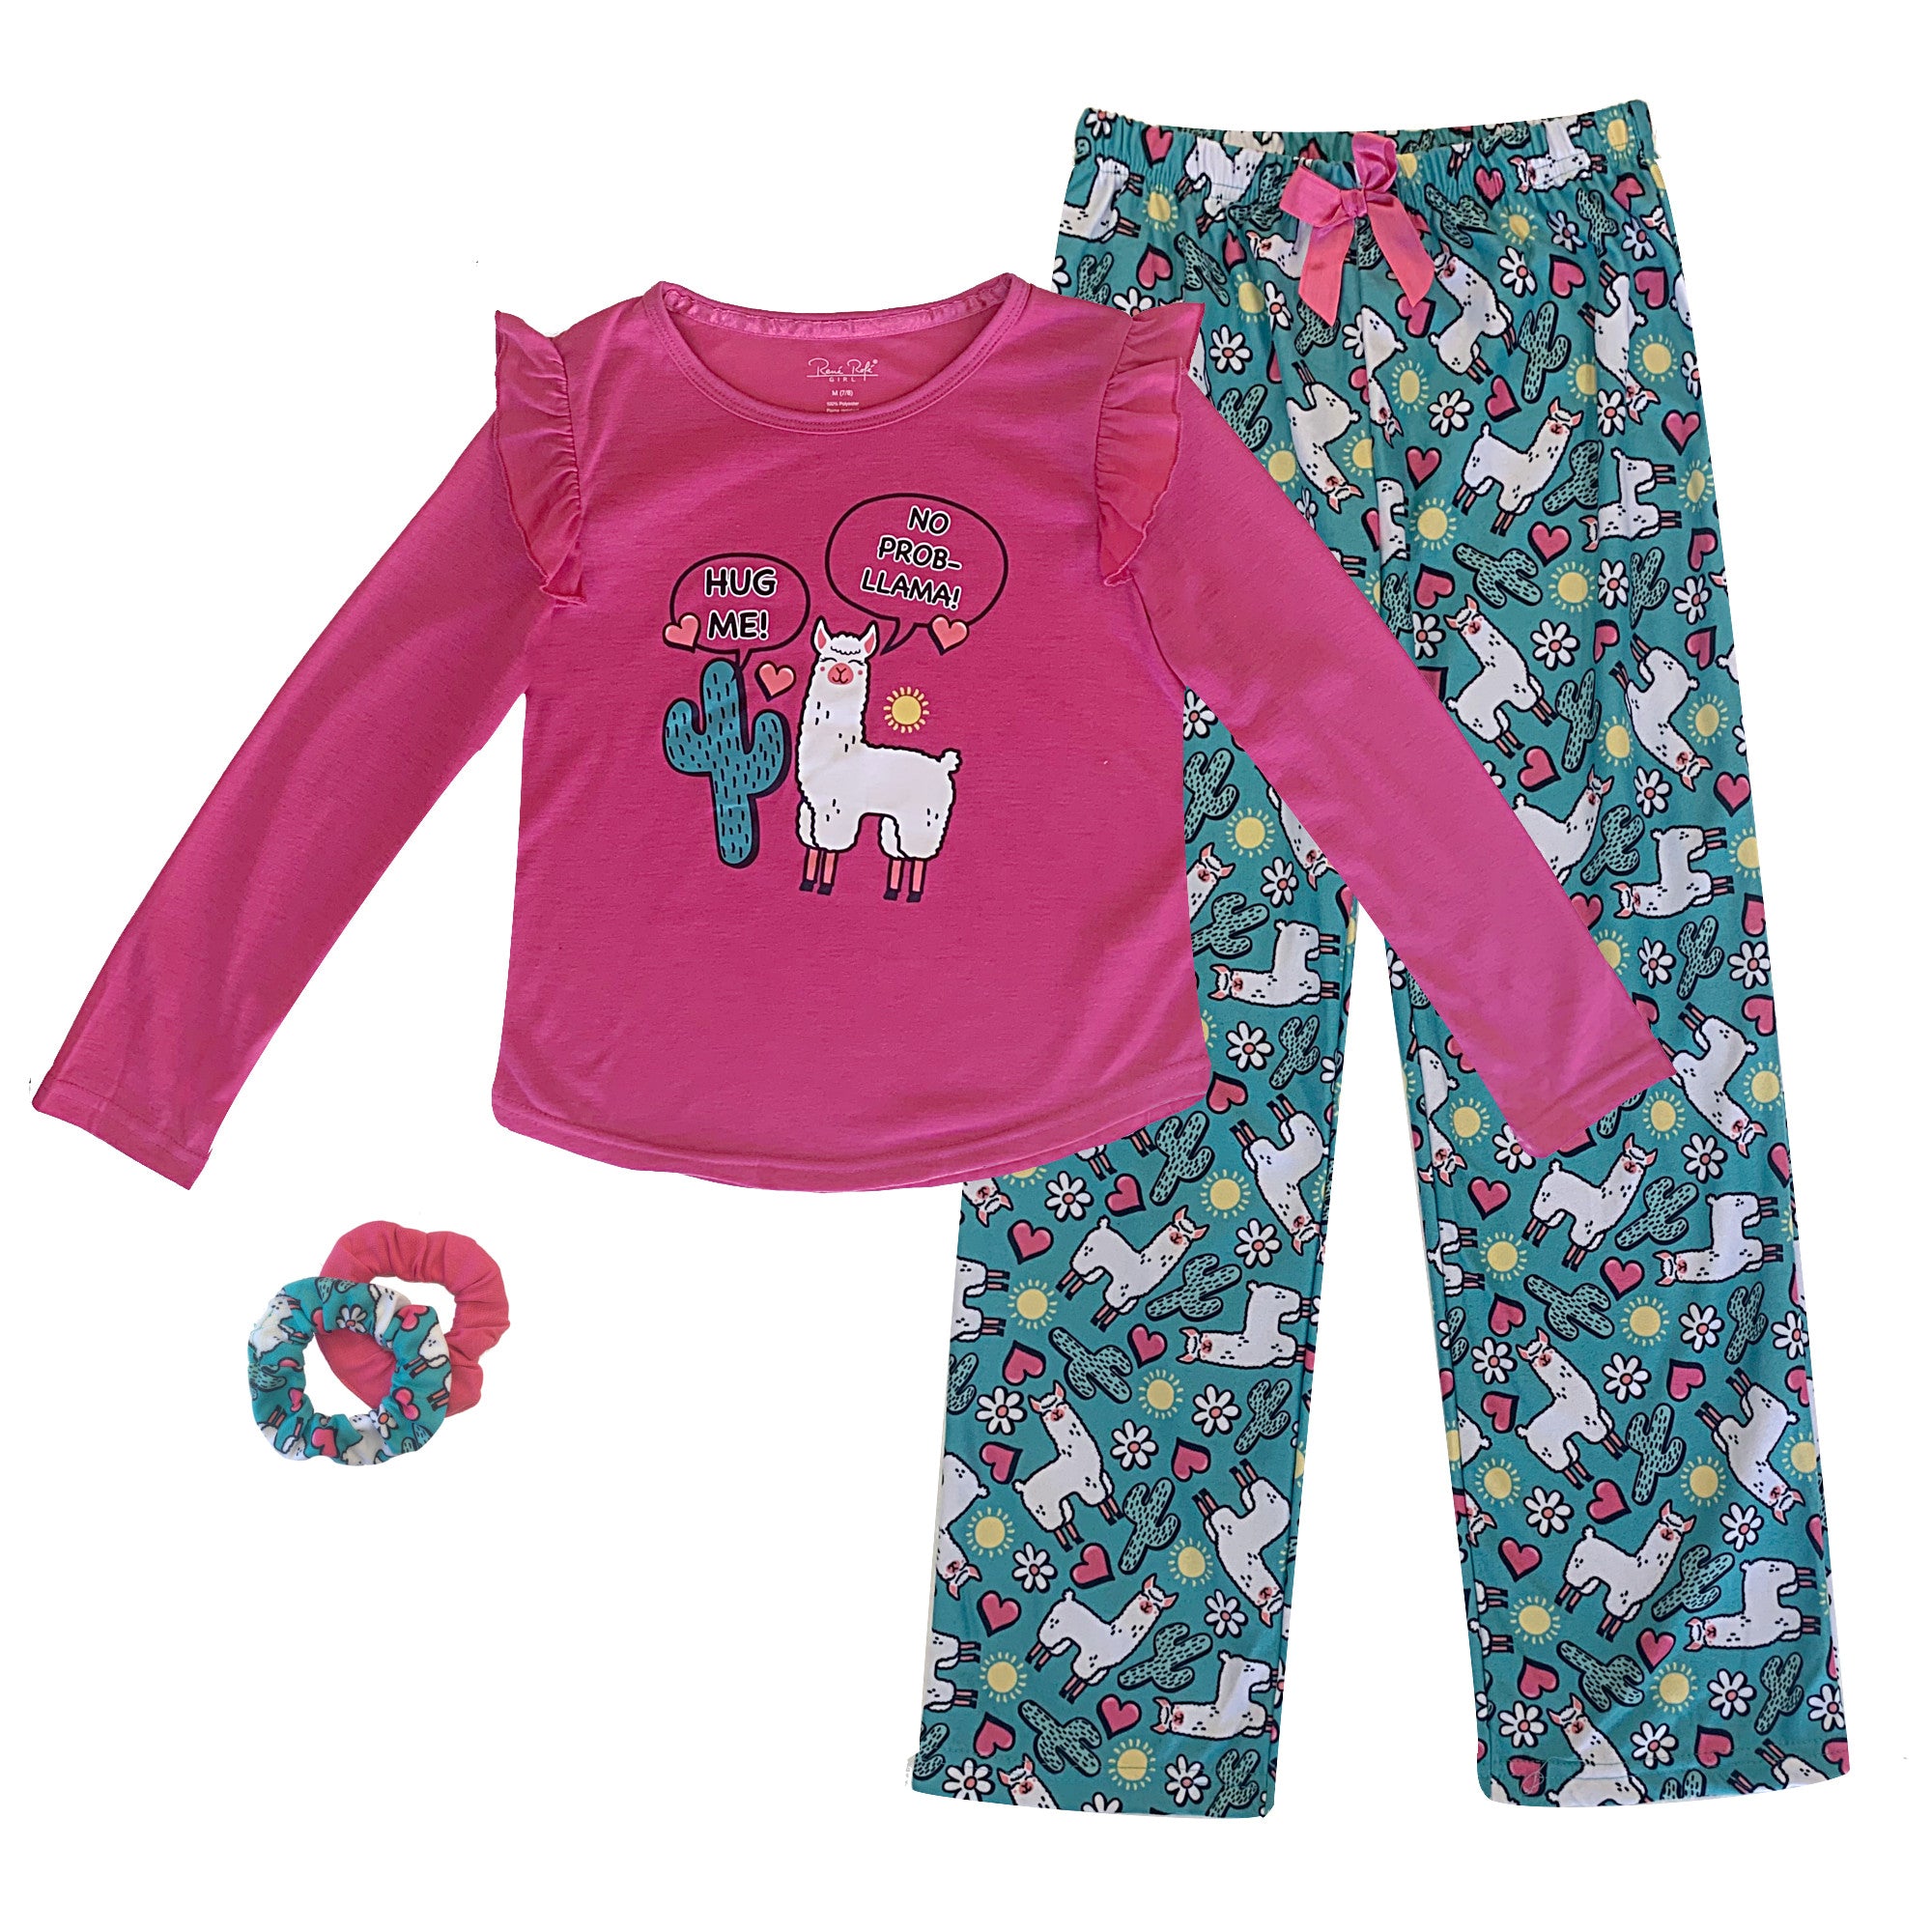 Popular Girl's Jersey Long Sleeve and Pant Set with Scrunchie - 3 Piece Pajama Matching Set